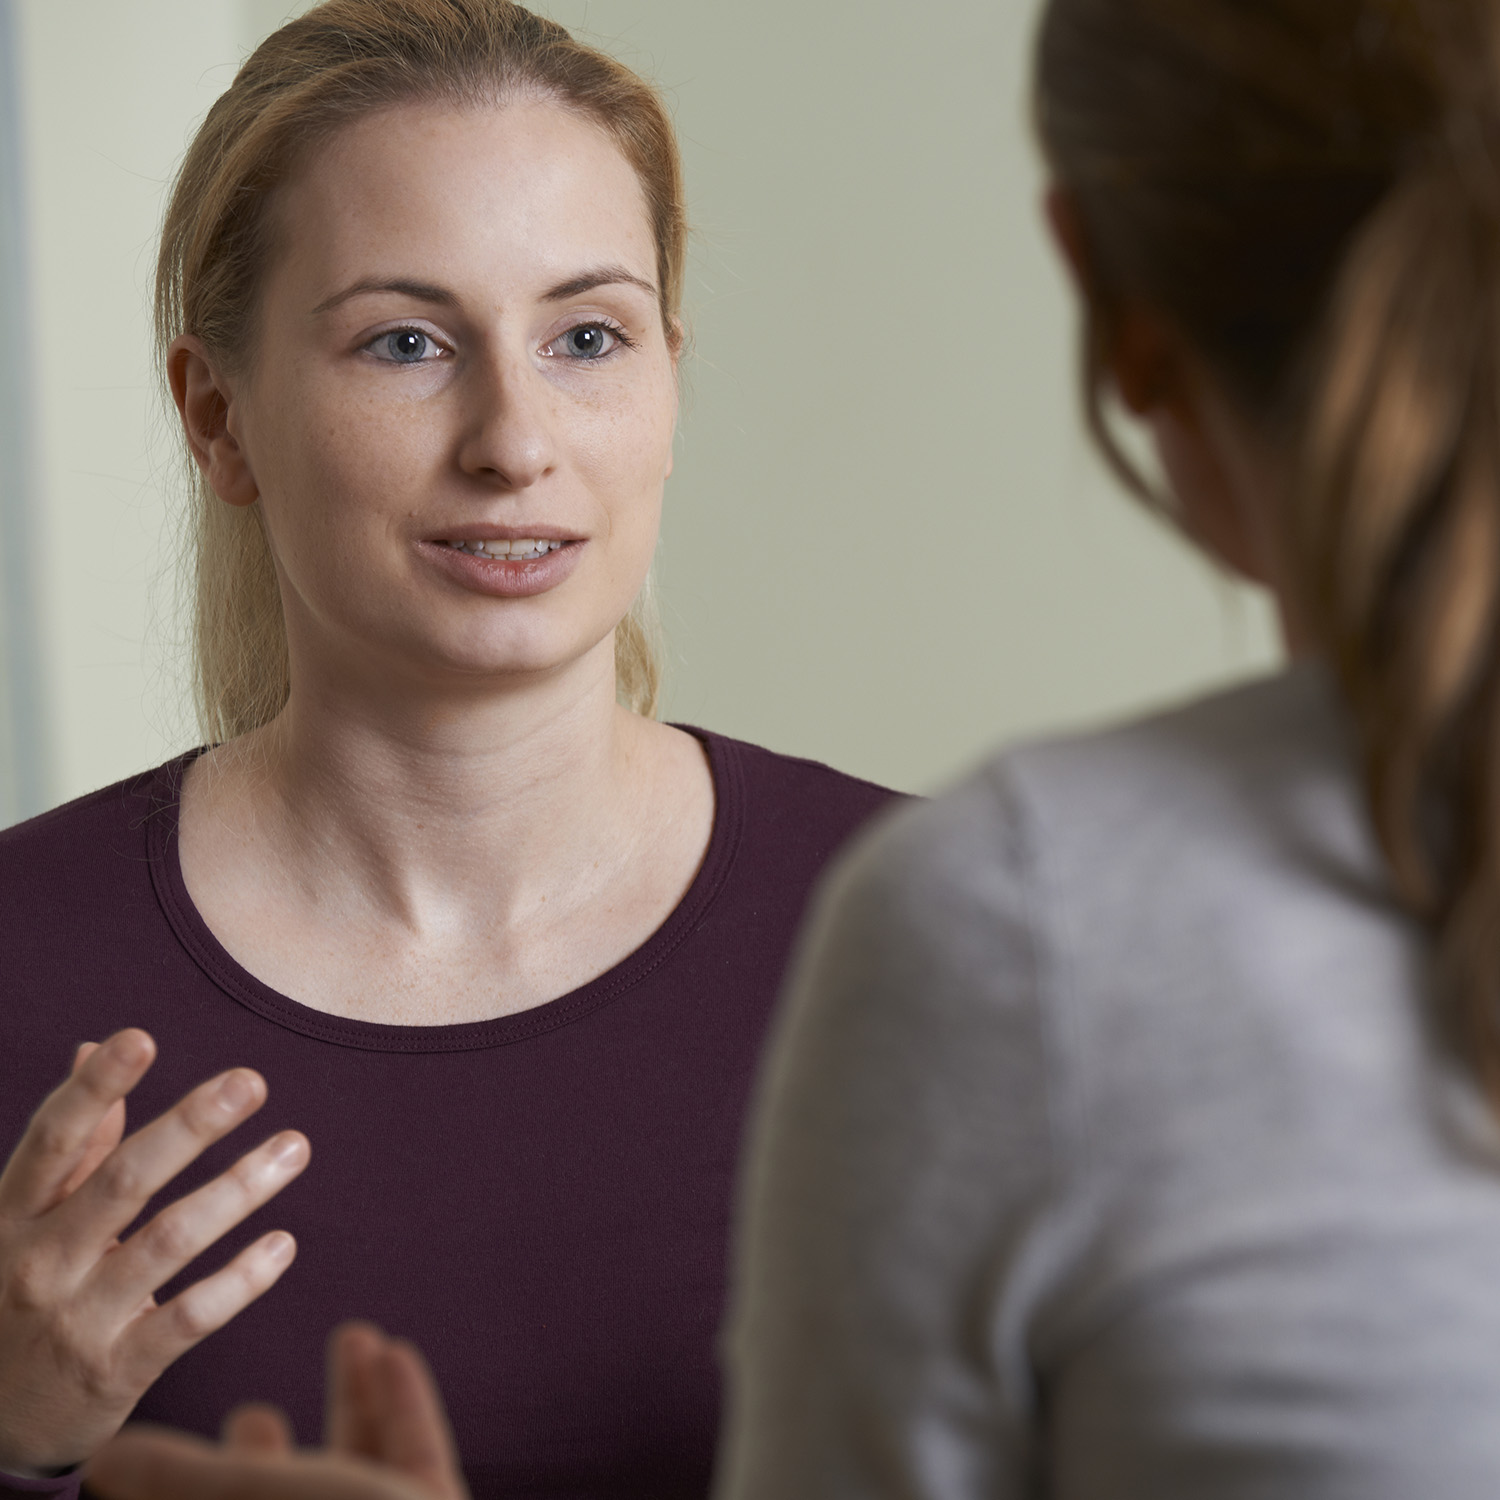 woman talking to therapist_gettyimages-508163490_square.jpg